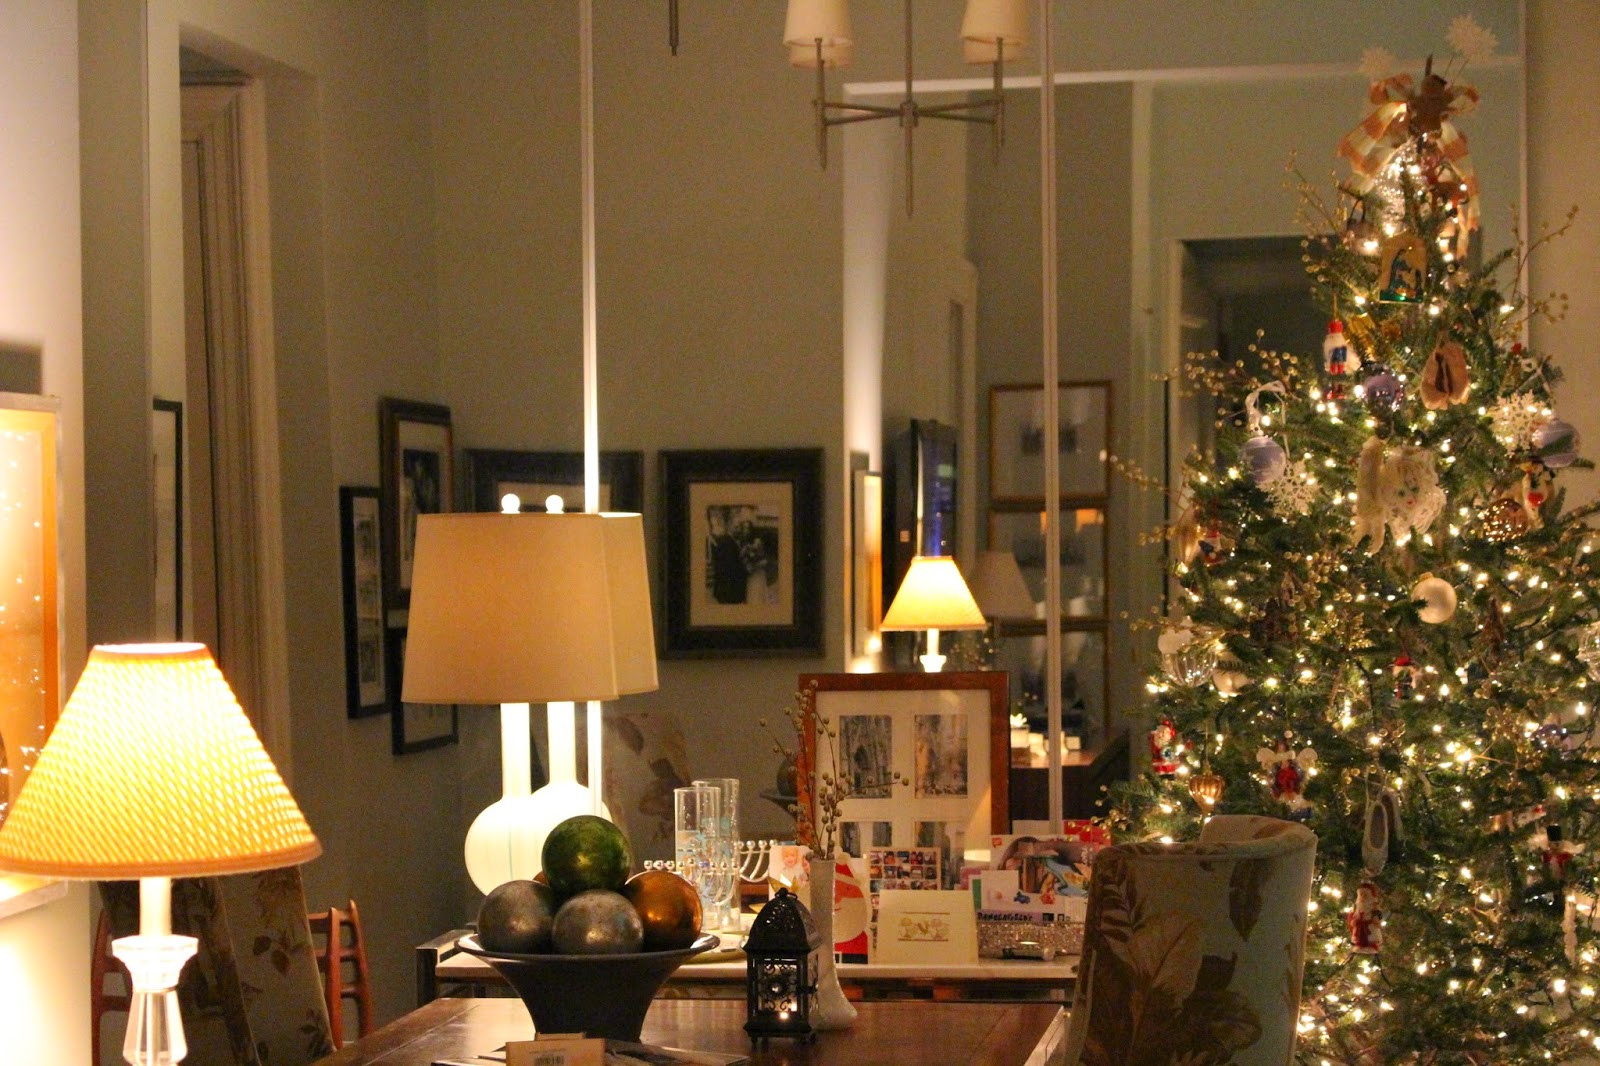 Christmas Apartment Decor
 Holiday Decorating in Small Spaces